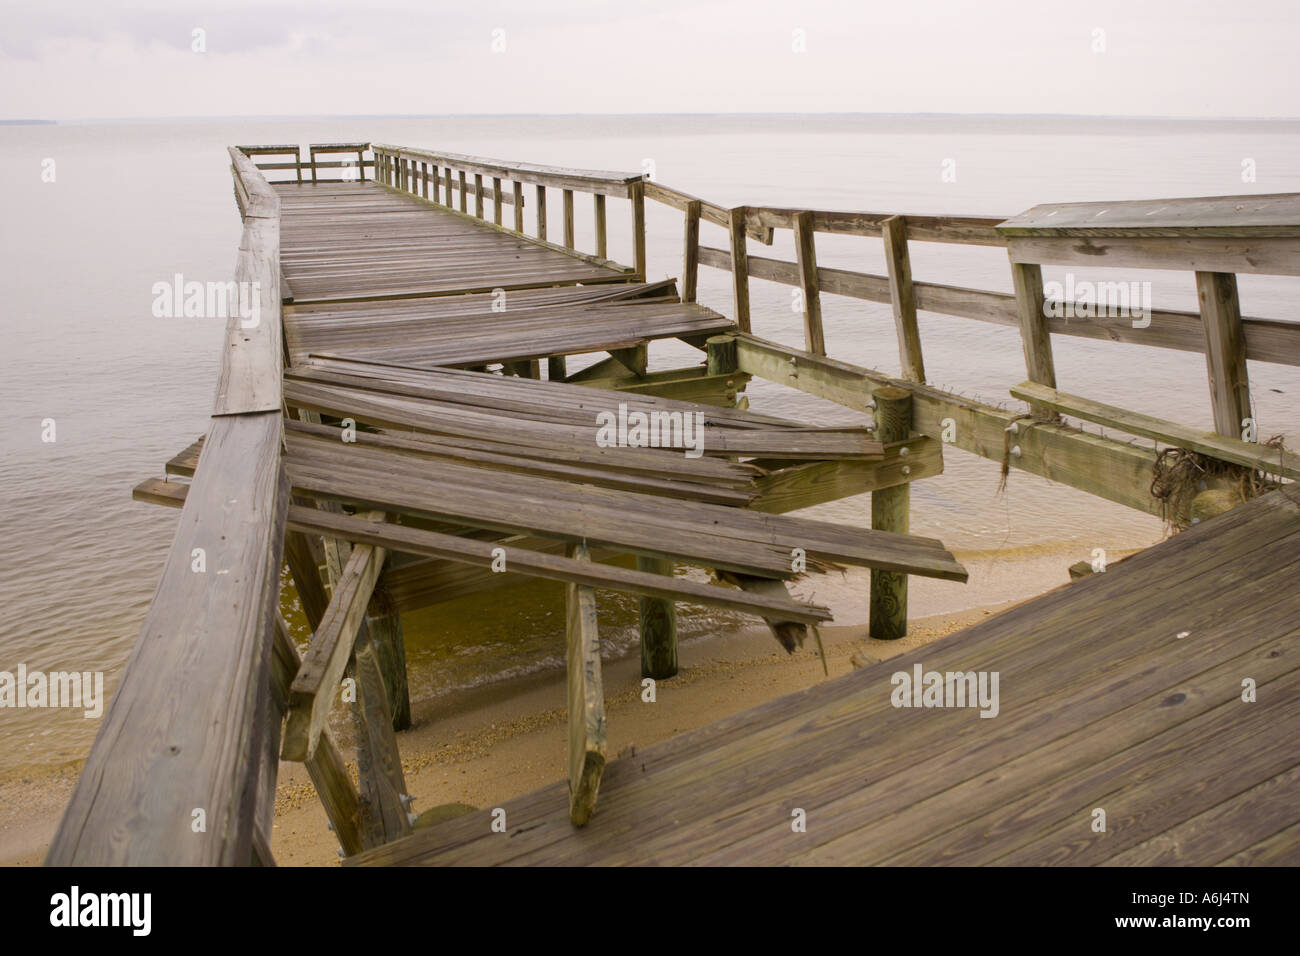 VIRGINIA USA Wooden pier damaged by hurricane on the beach at Woodbridge State Park on the Potomac RIver Stock Photo